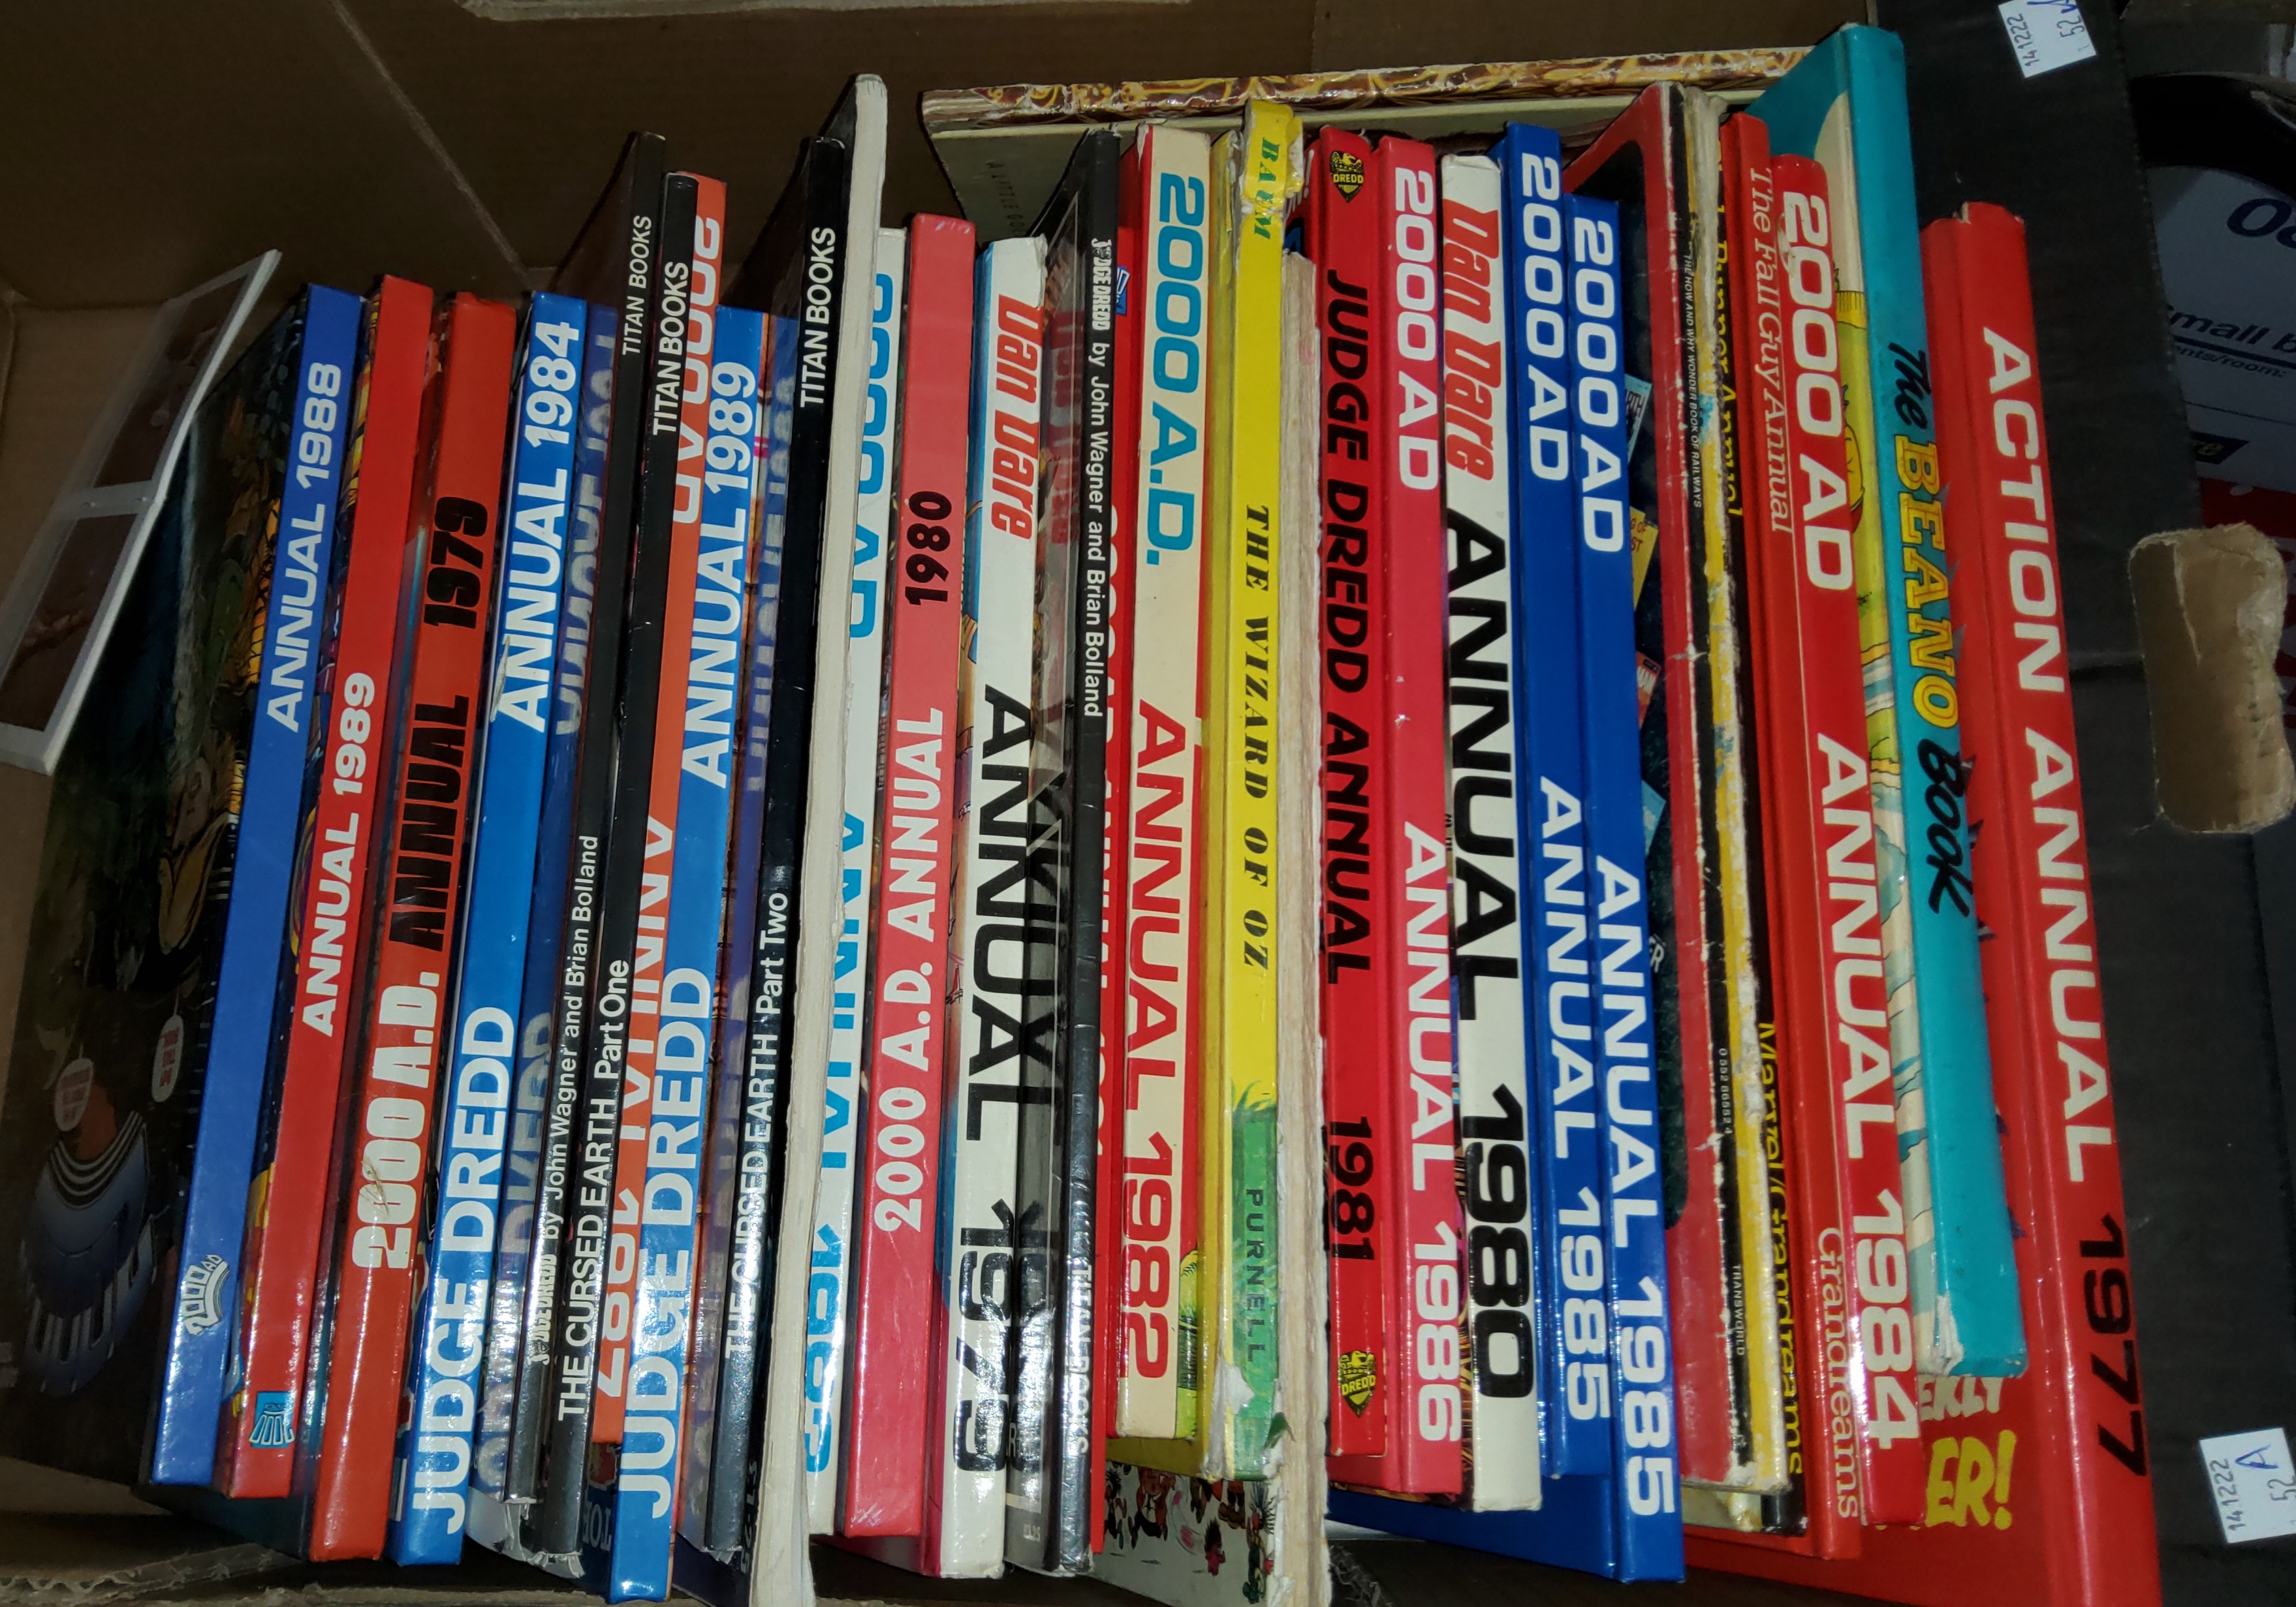 A selection of 2000AD and Judge Dredd Annuals and comics from 1979 and later